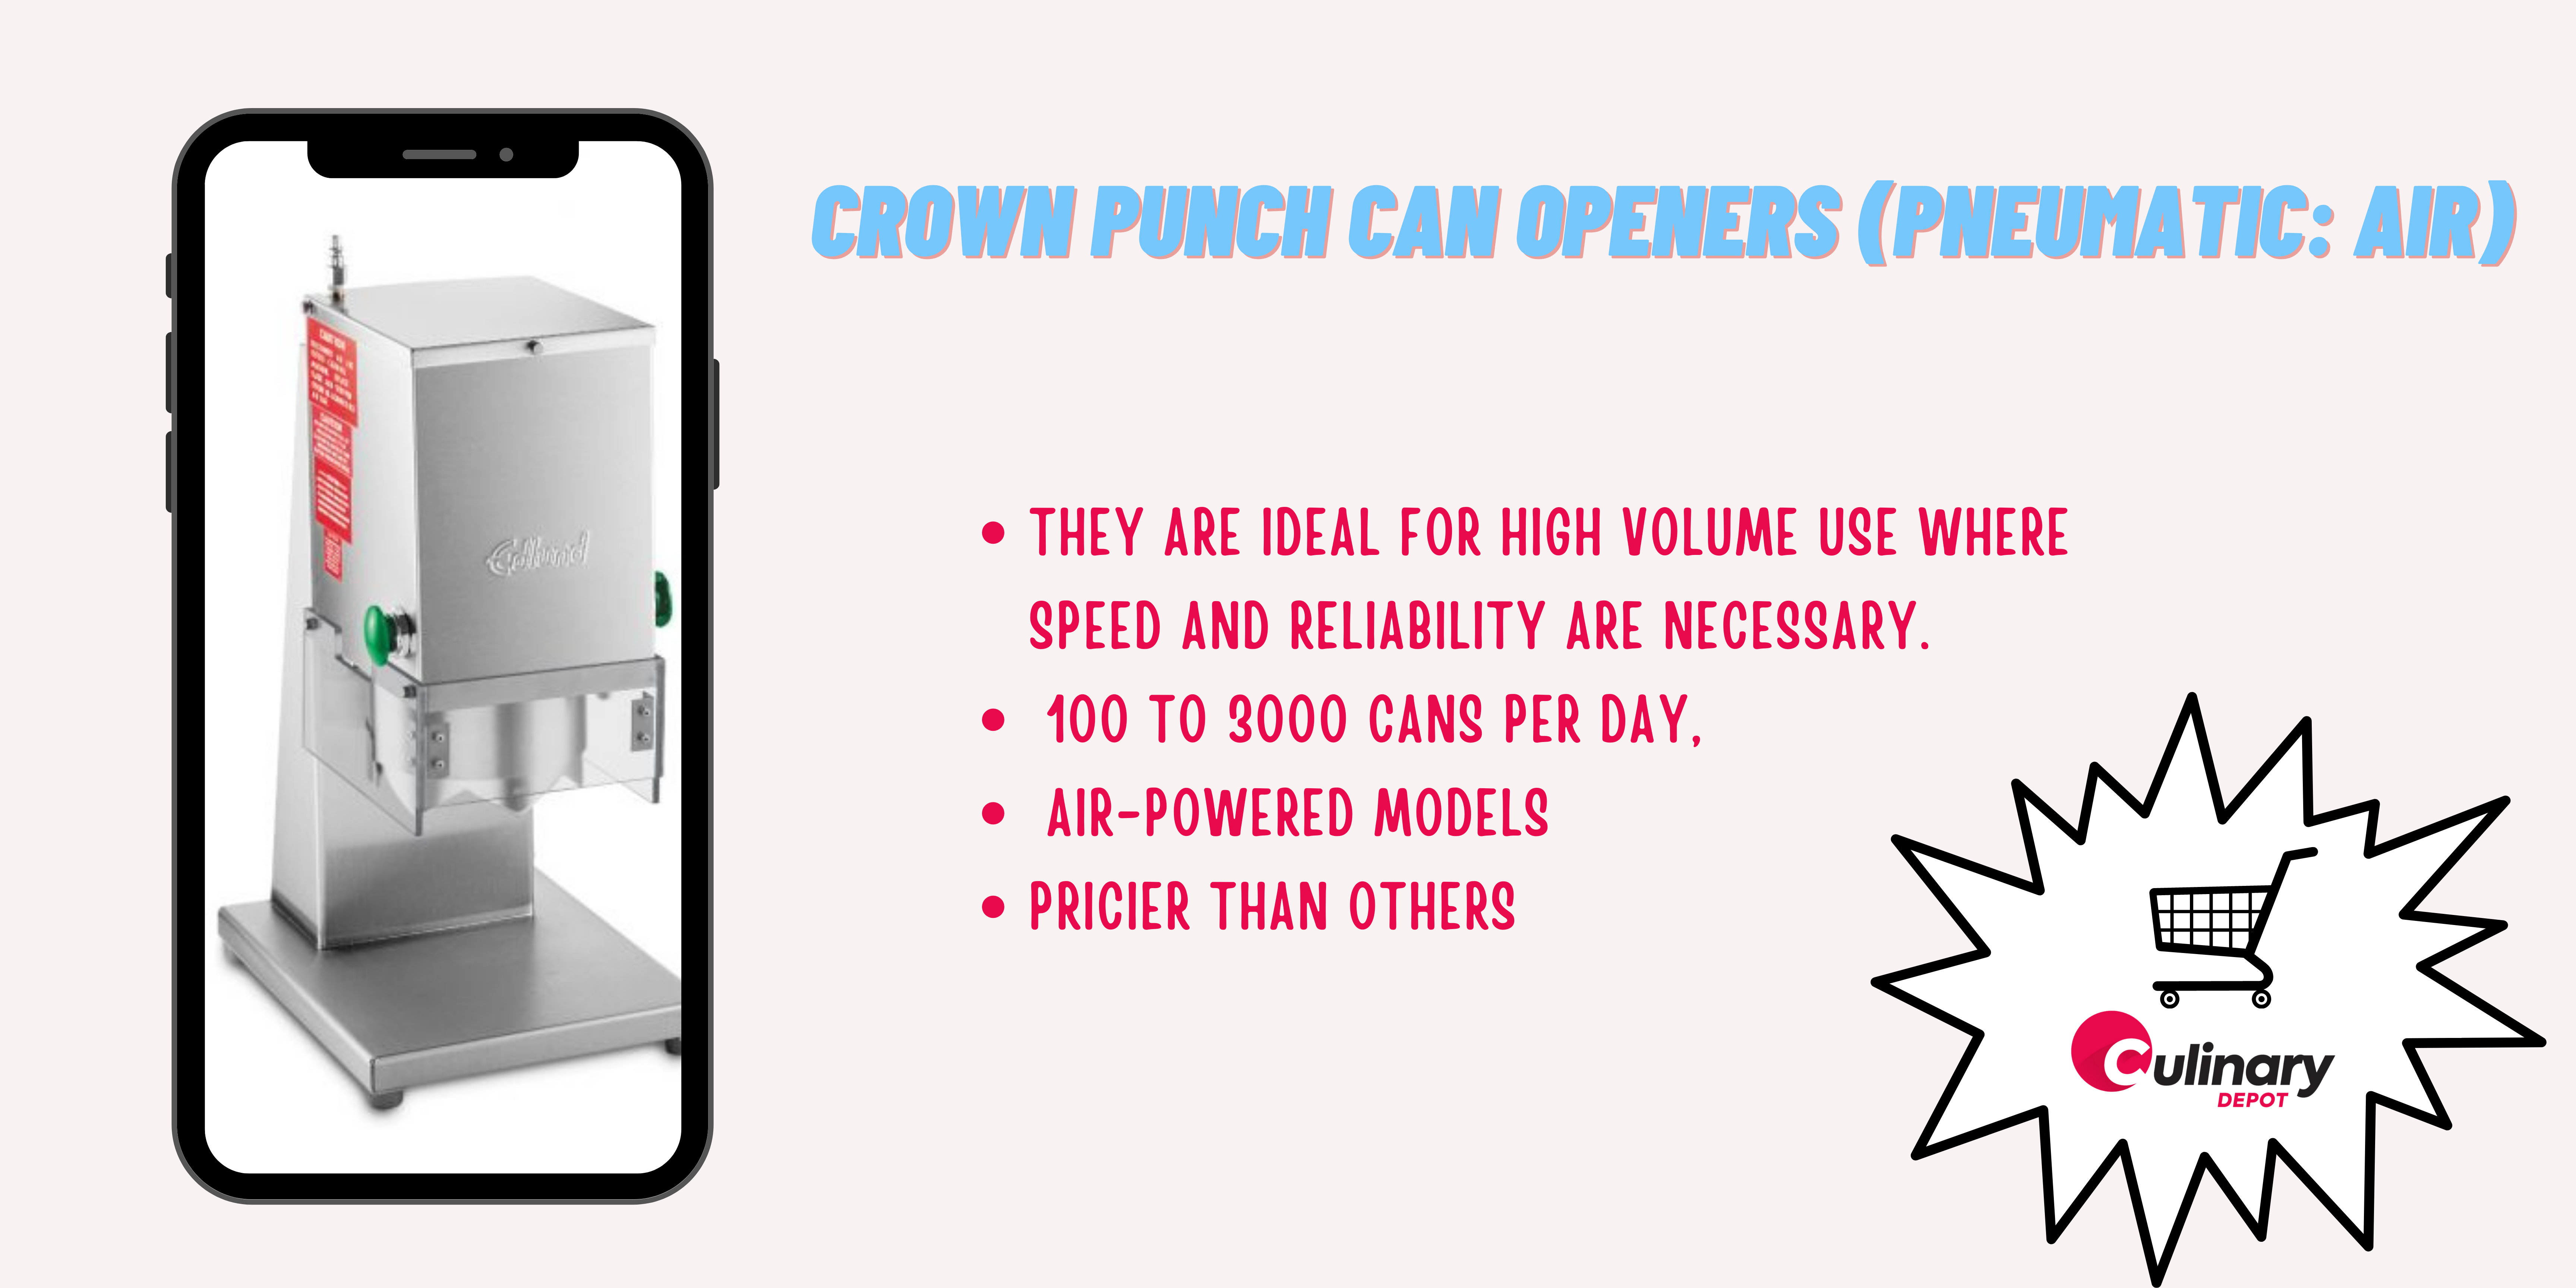 https://www.culinarydepotinc.com/product_images/uploaded_images/crown-punch-can-openers-pneumatic-air-.png